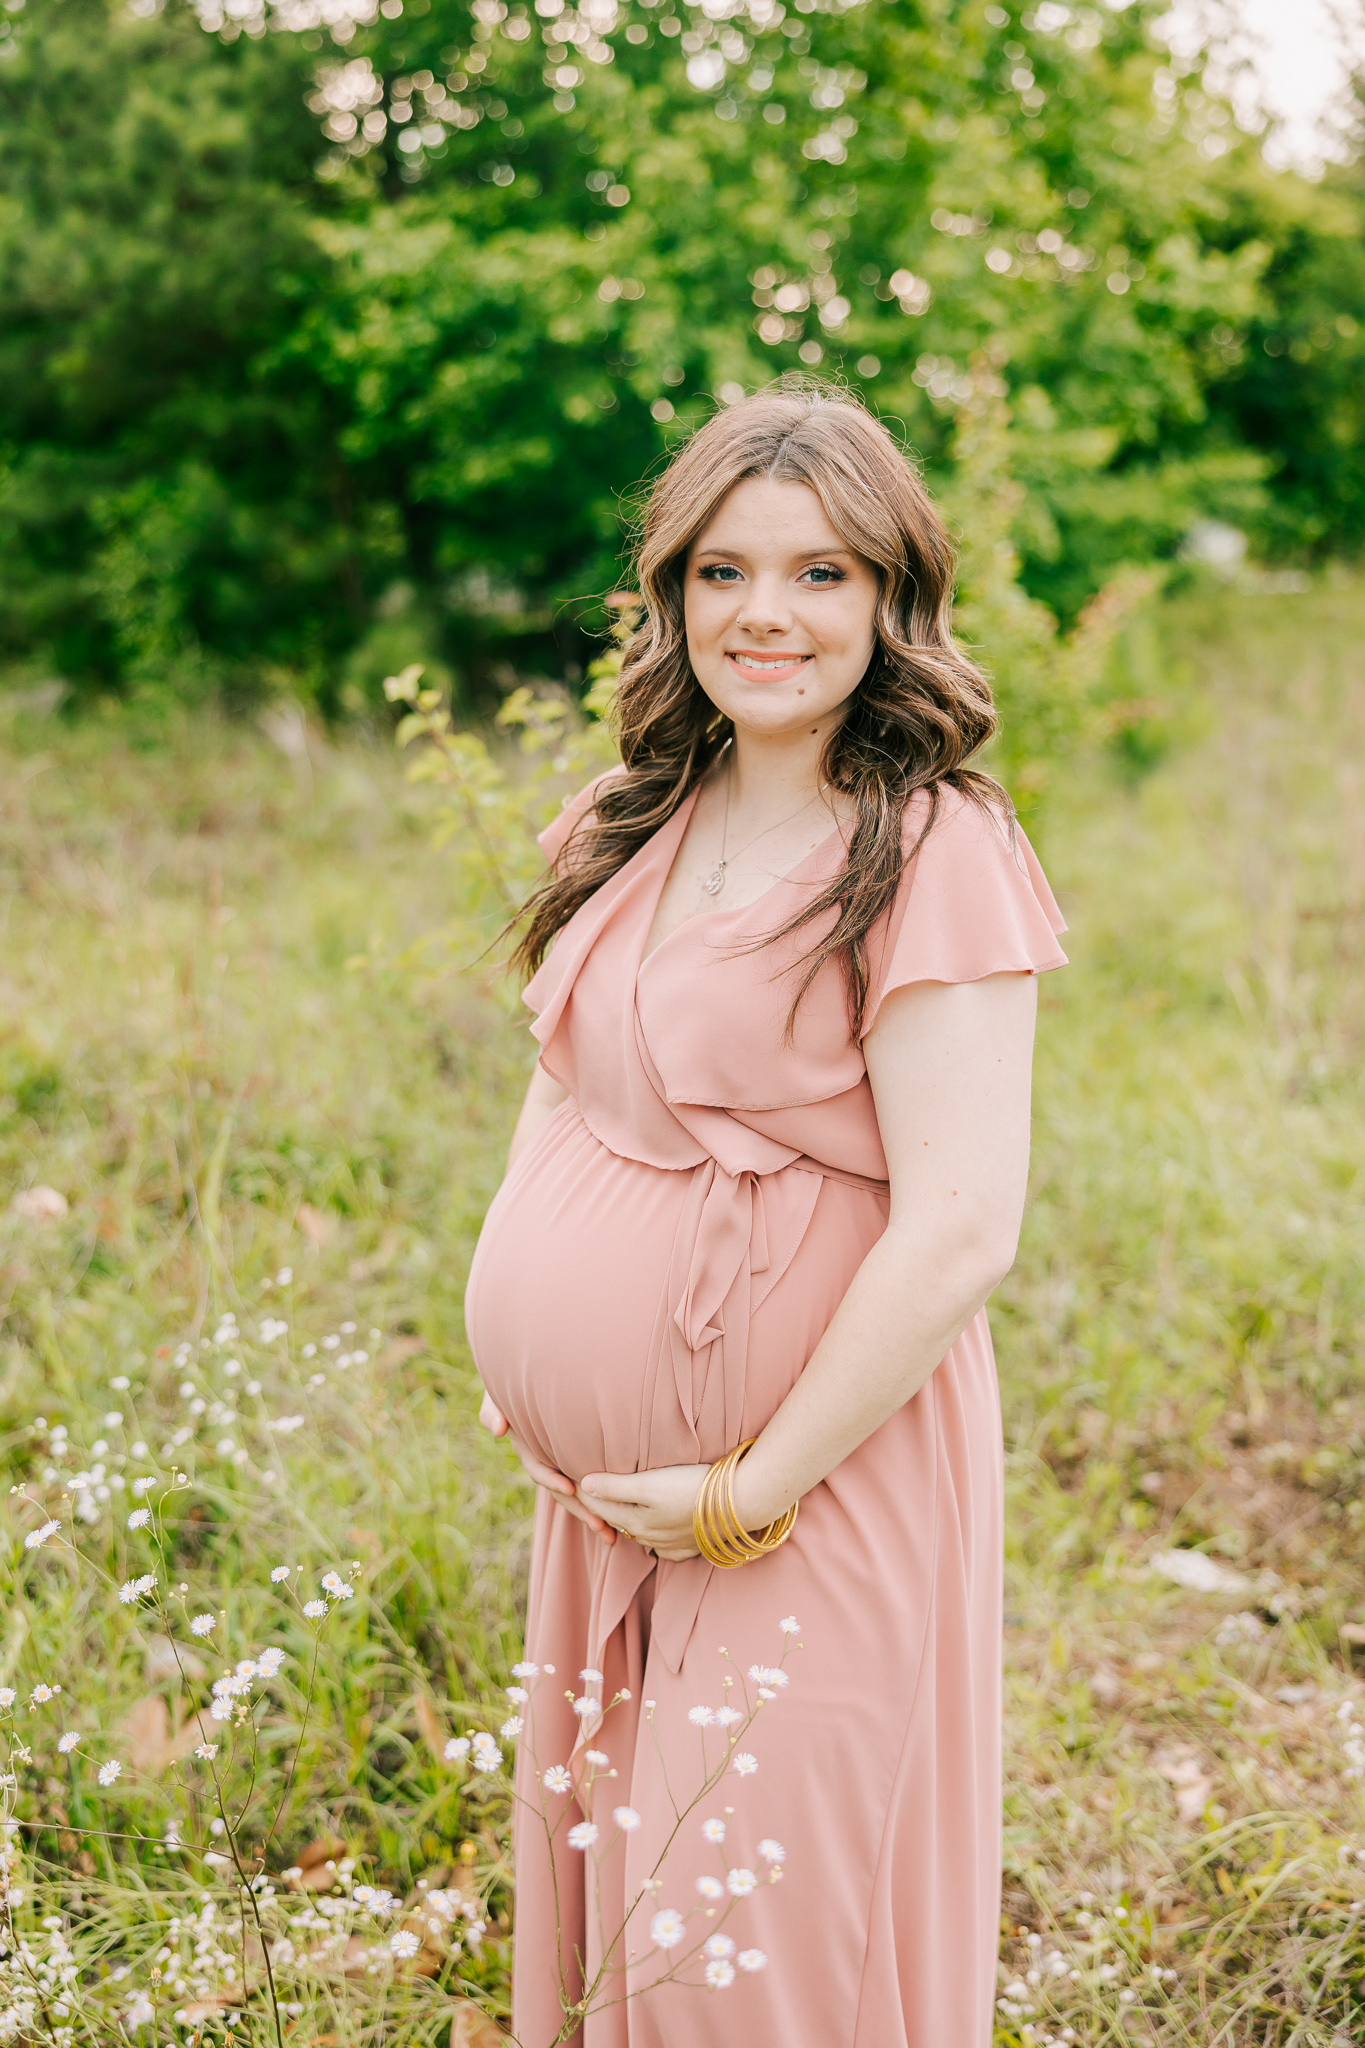 Expecting mom holding her baby belly during her maternity photography session with molly berry.